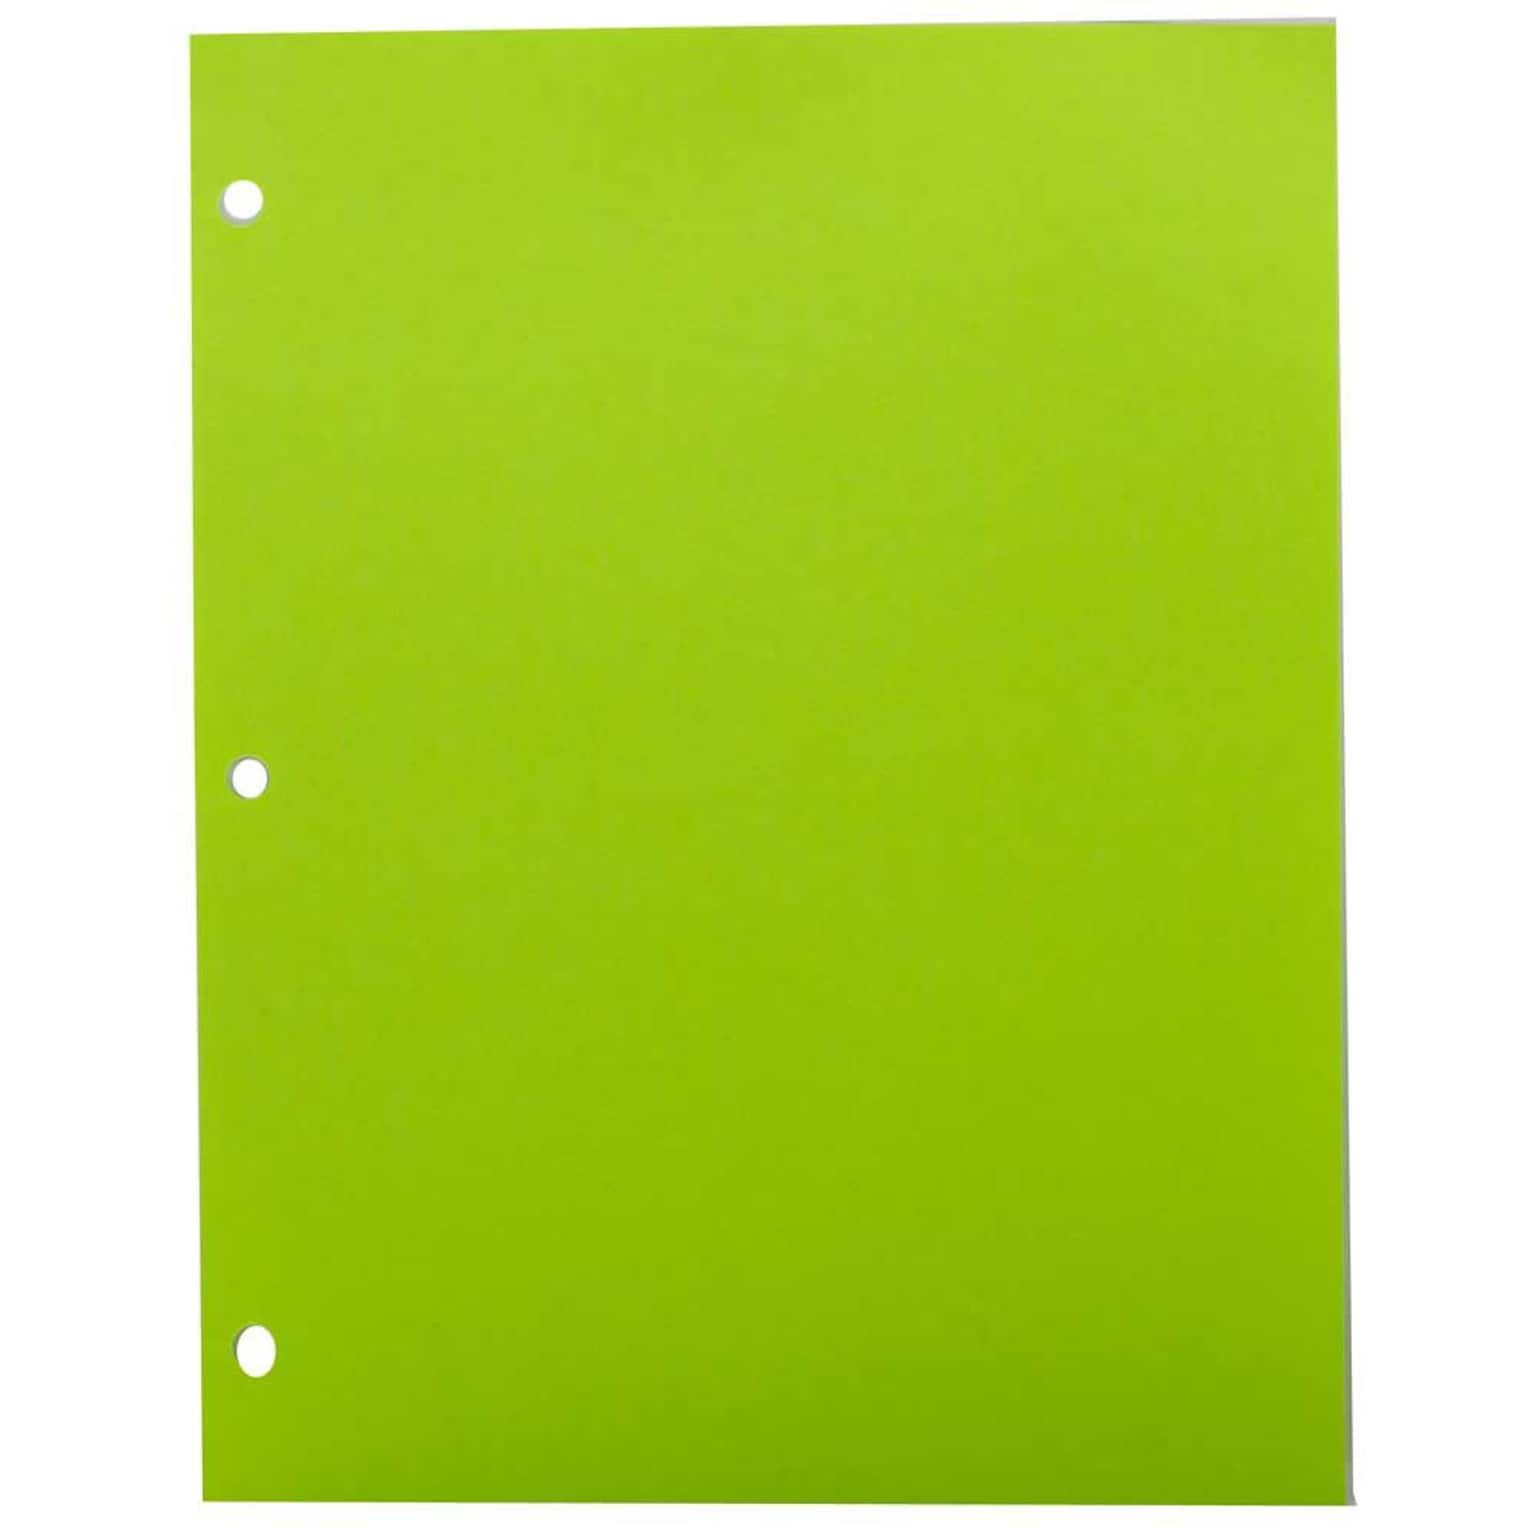 JAM Paper 8.5 x 11 3 Hole Punch Multipurpose Paper, 24 lbs., Ultra Lime Green, 100 Sheets/Pack (354428160)